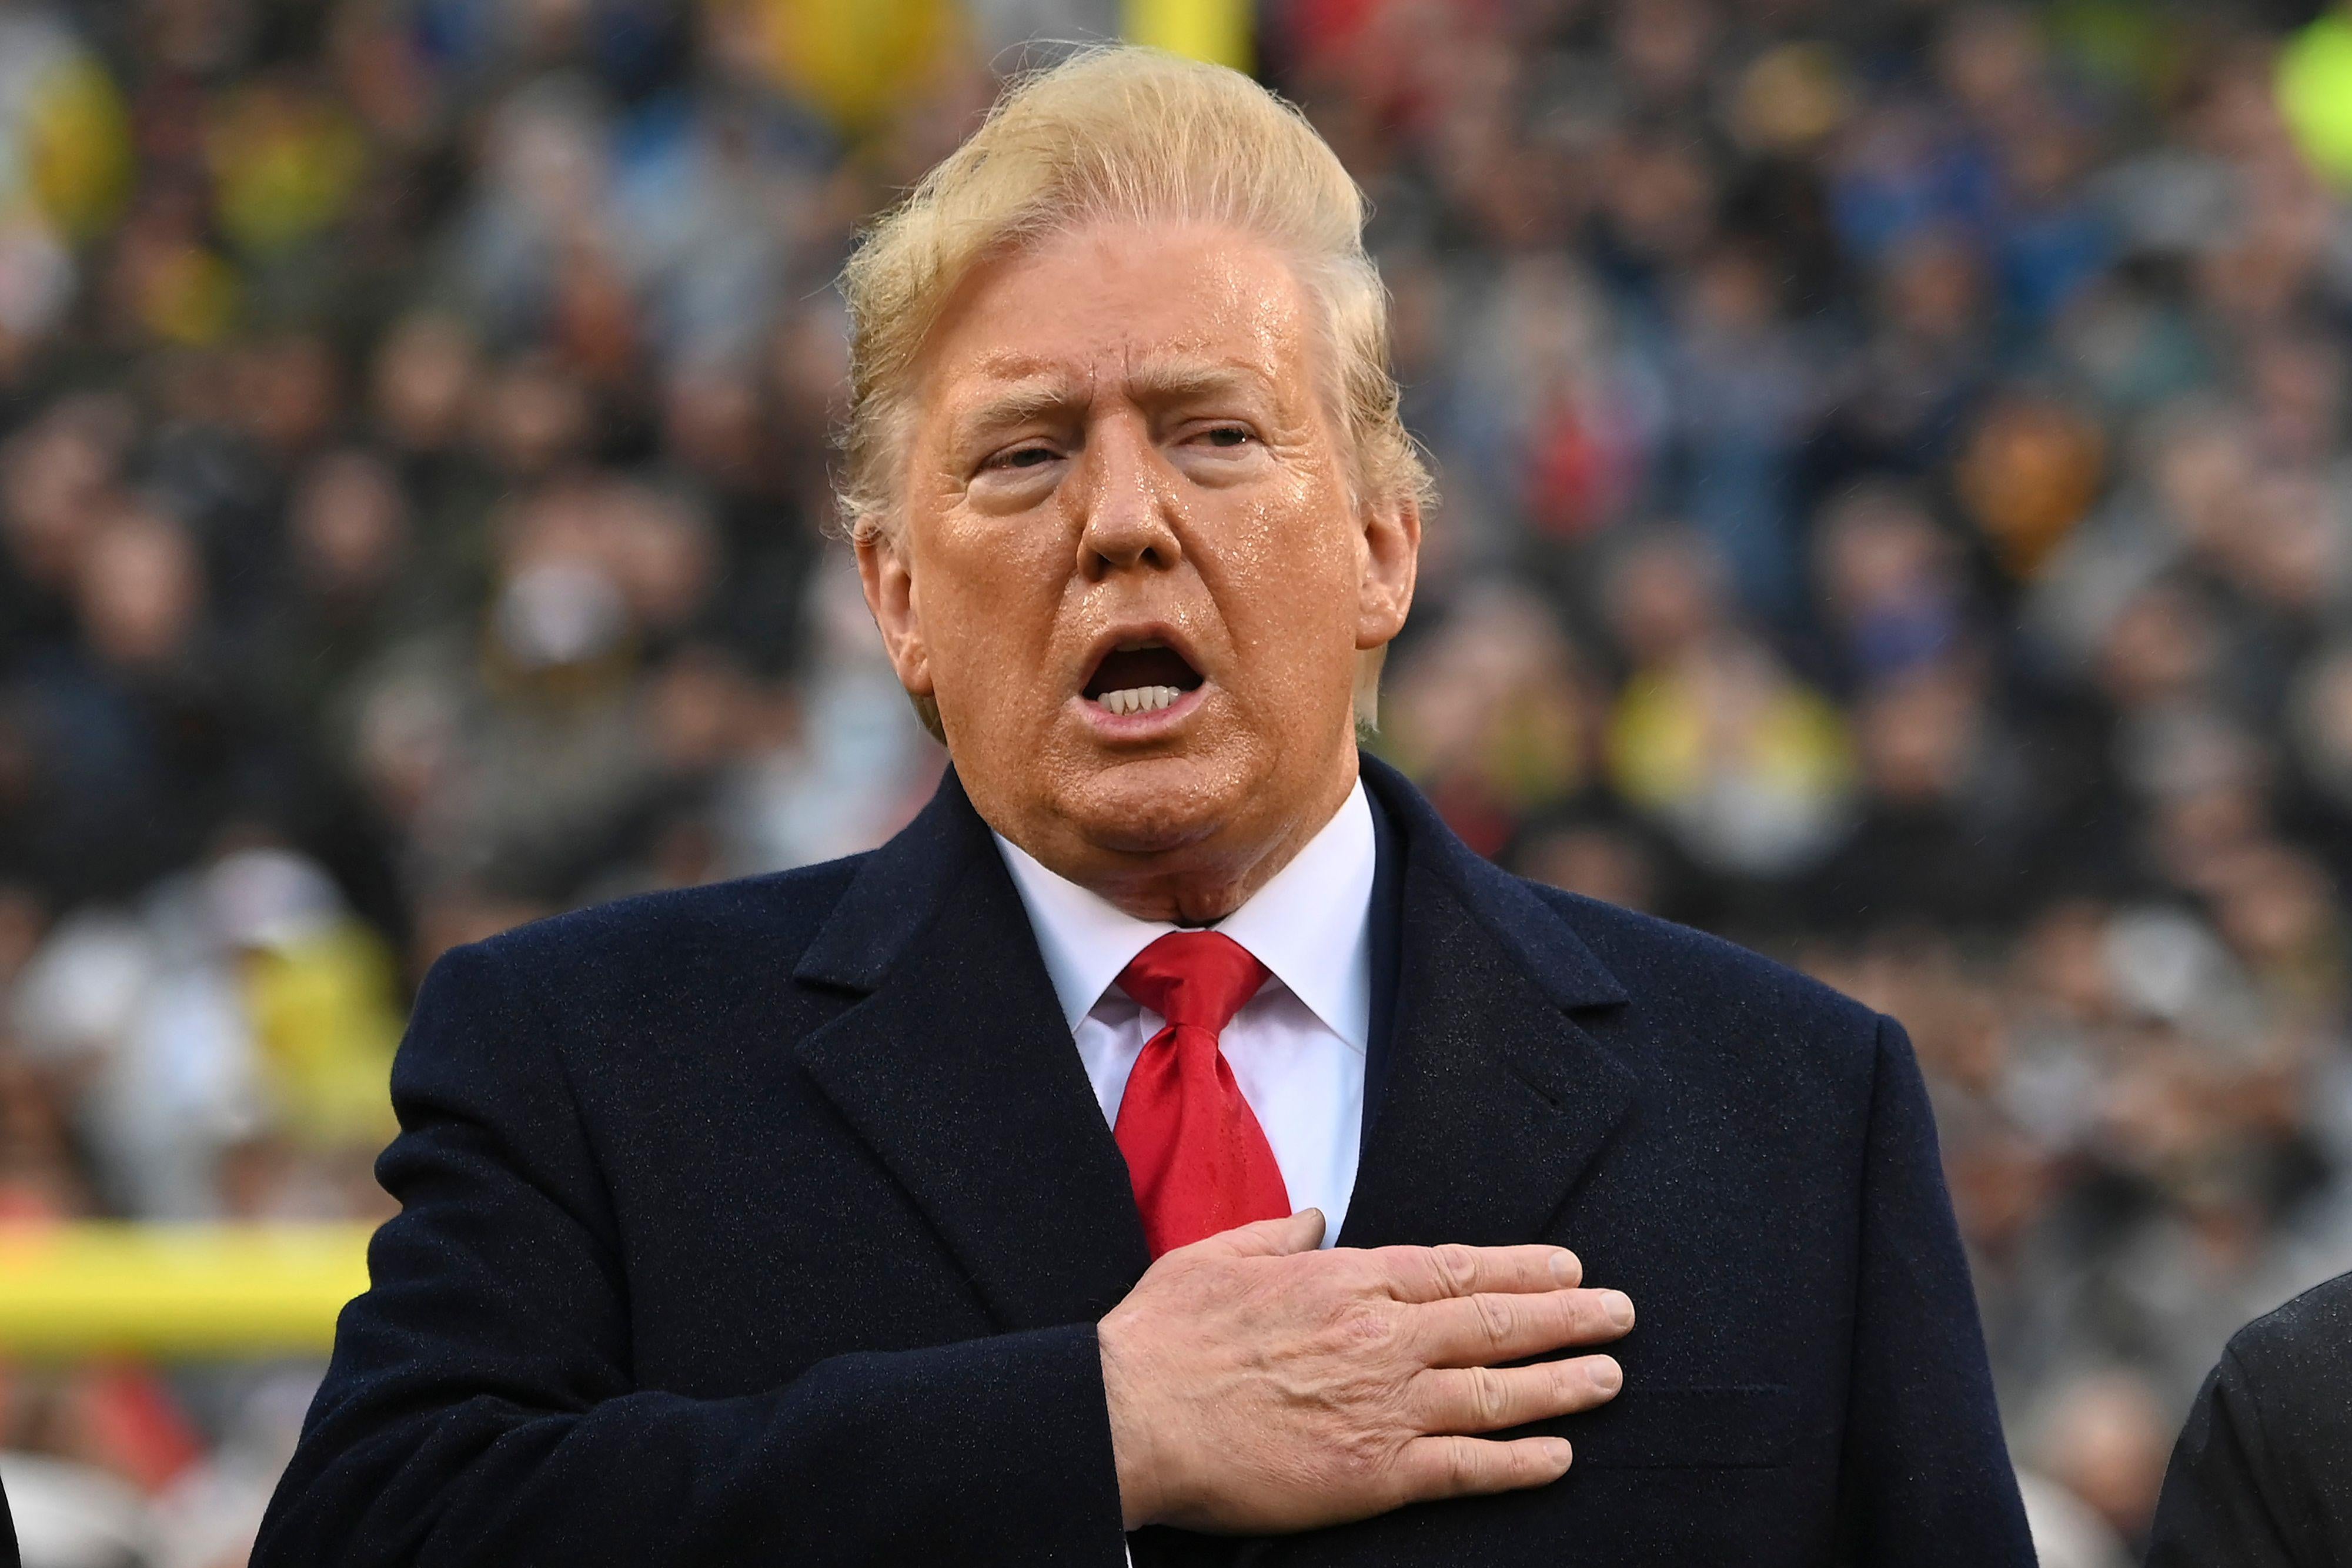 President Donald Trump sings the National Anthem prior to the Army-Navy football game in Philadelphia, Pennsylvania on December 14, 2019.